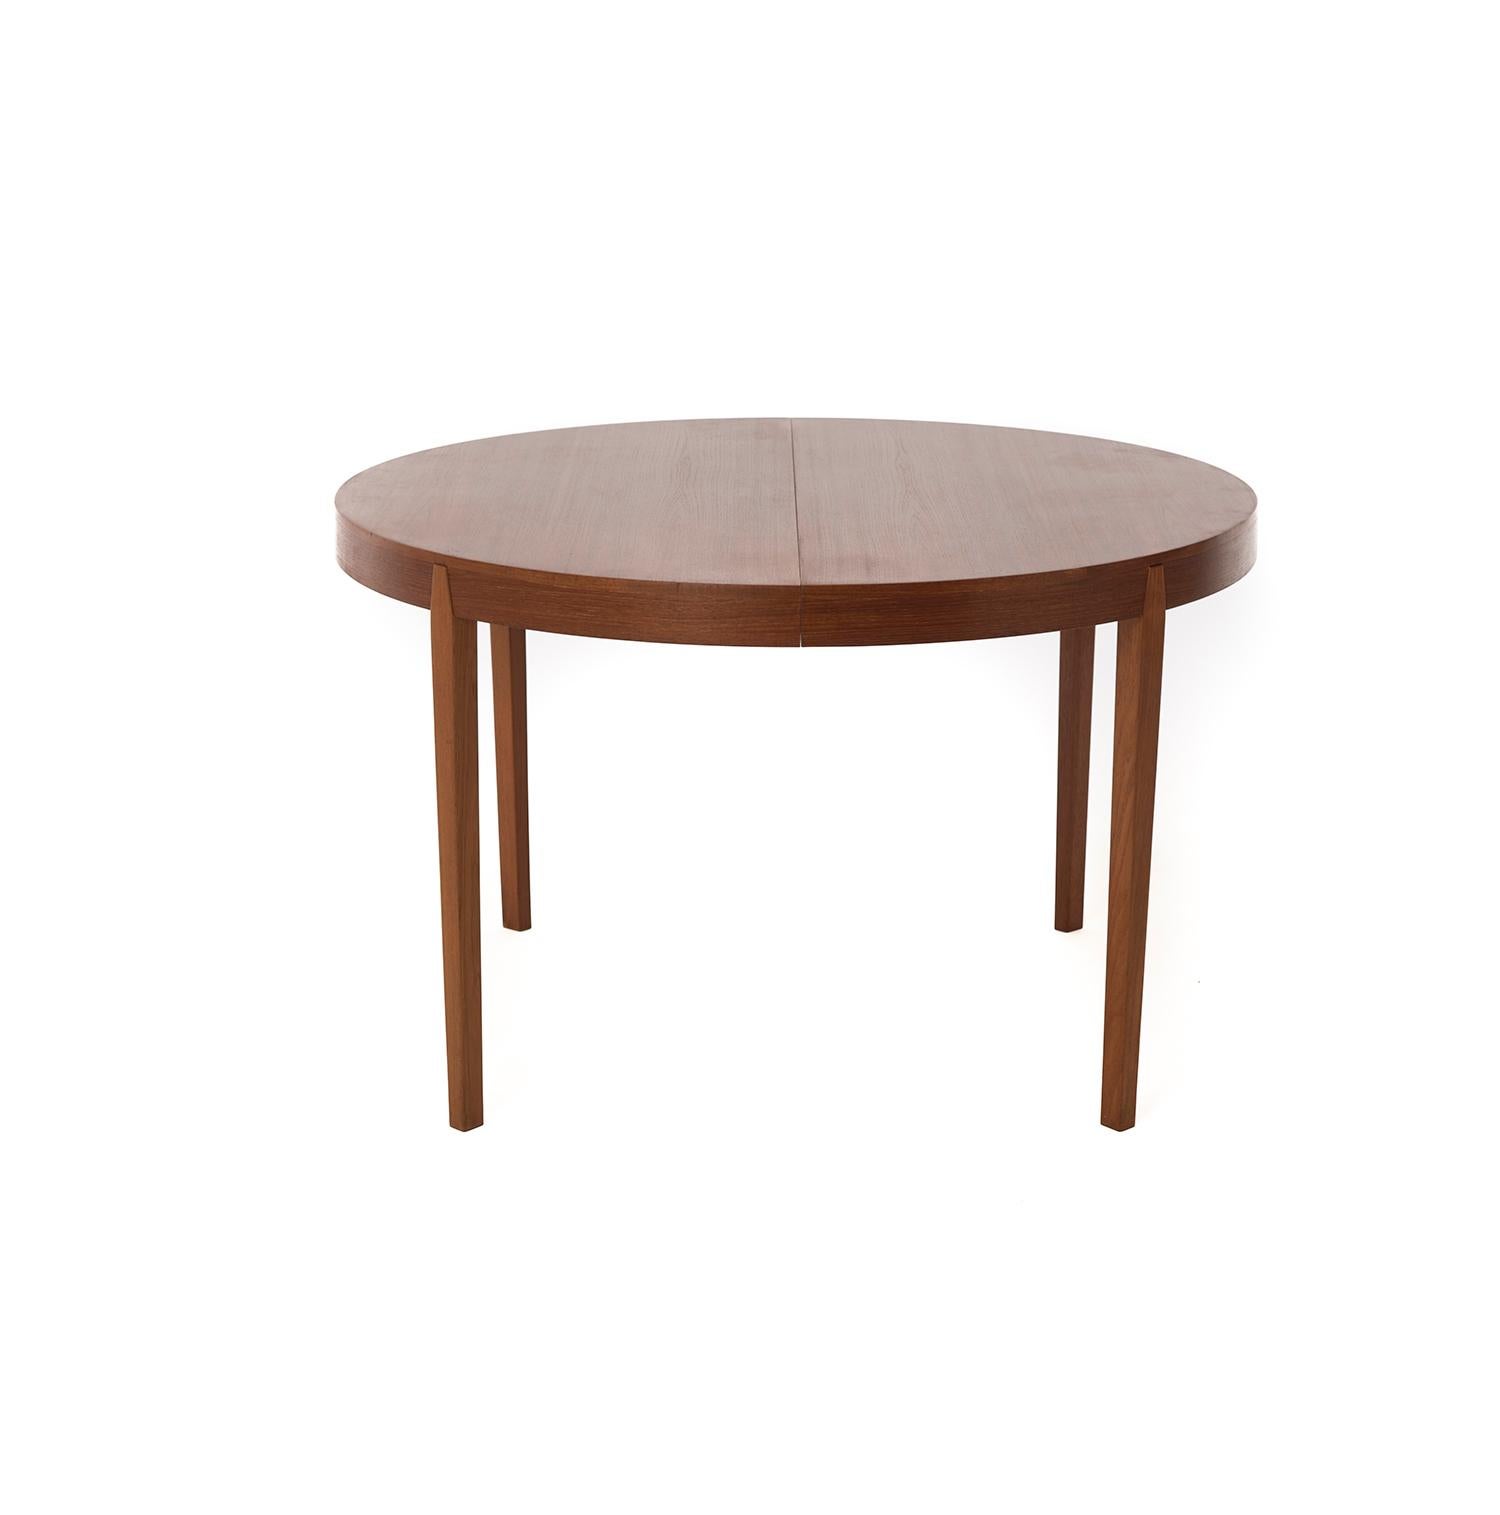 This Danish modern teak dining table is round at it's smallest and becomes an oval with the insertion of one or two aproned leaves. Leg detail sets into apron in a pleasing way. Oiled old growth teak. Seats 10-12.